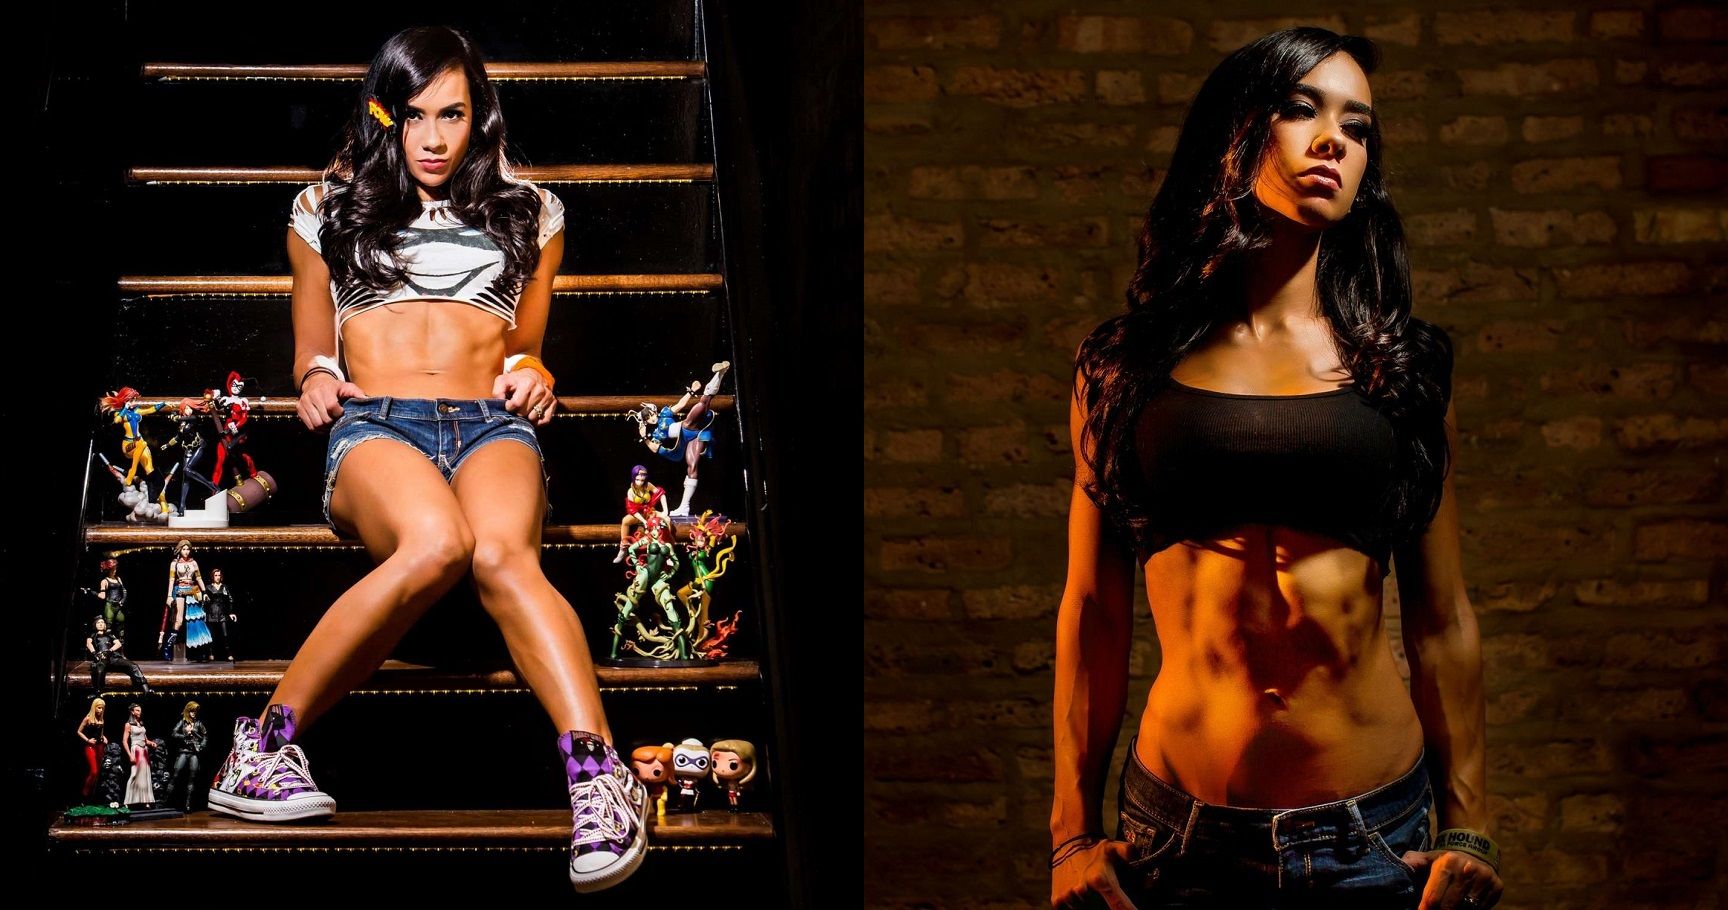 Top 20 Hot Pictures of AJ Lee You NEED To See.